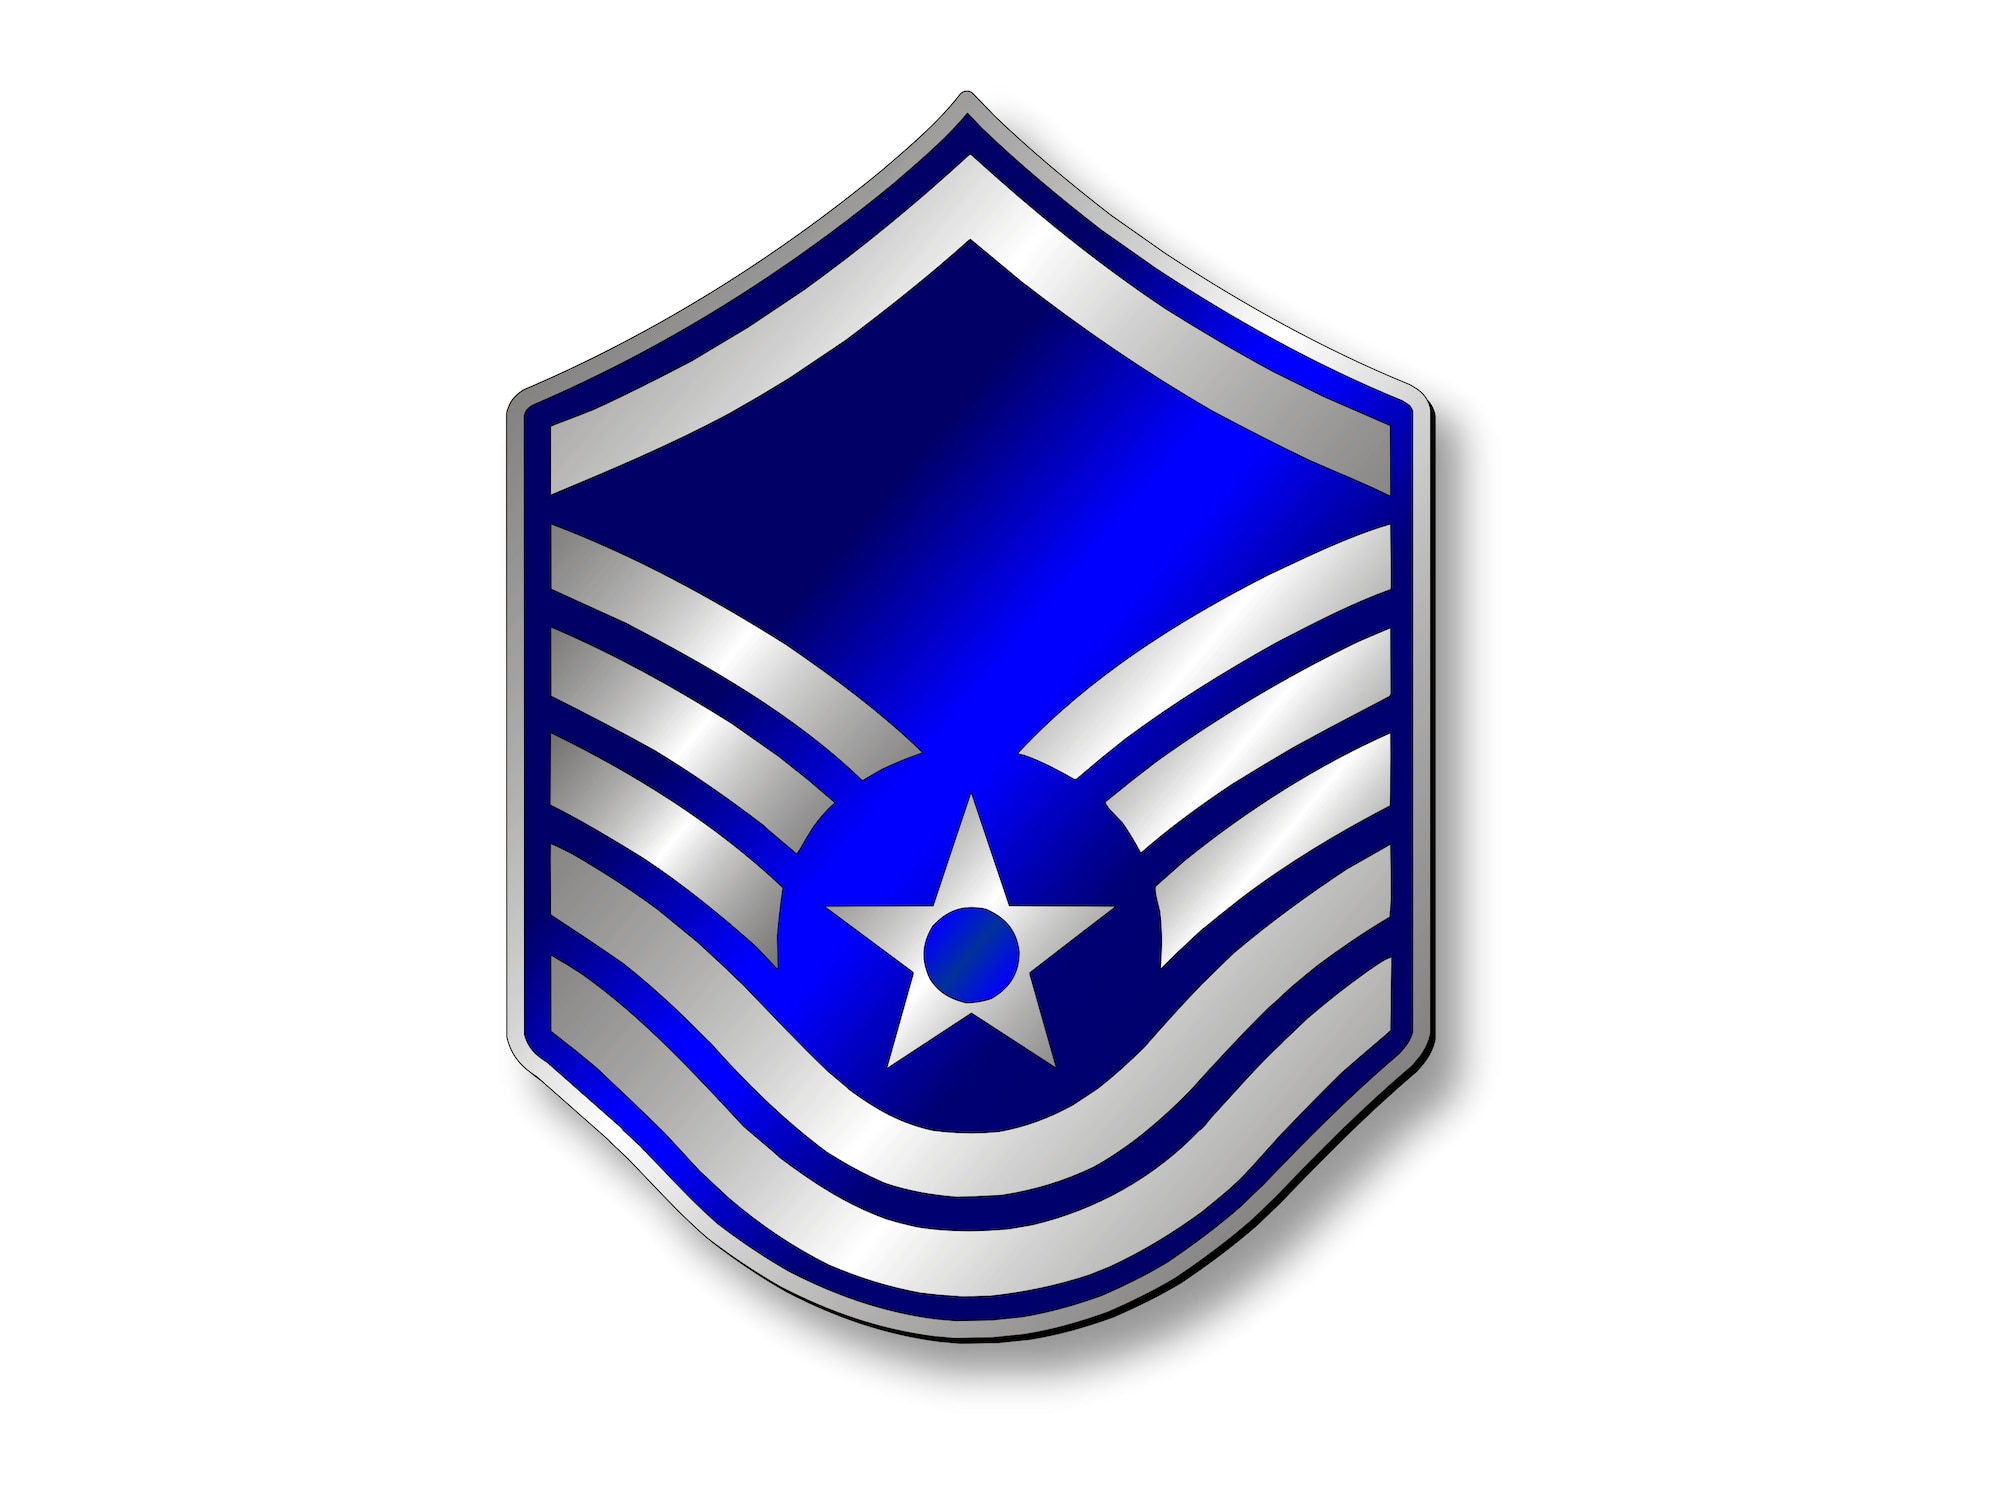 The insignia for the rank of master sergeant is represented by a star with six chevrons and is the first rank in the senior non-commissioned officer tier. Master sergeants are charged with setting high standards of personal integrity, loyalty, leadership, dedication and devotion to duty including upholding policies, traditions and standards. The average service-wide active duty time for advancement to the rank of master sergeant is over 17 years. (Courtesy graphic)